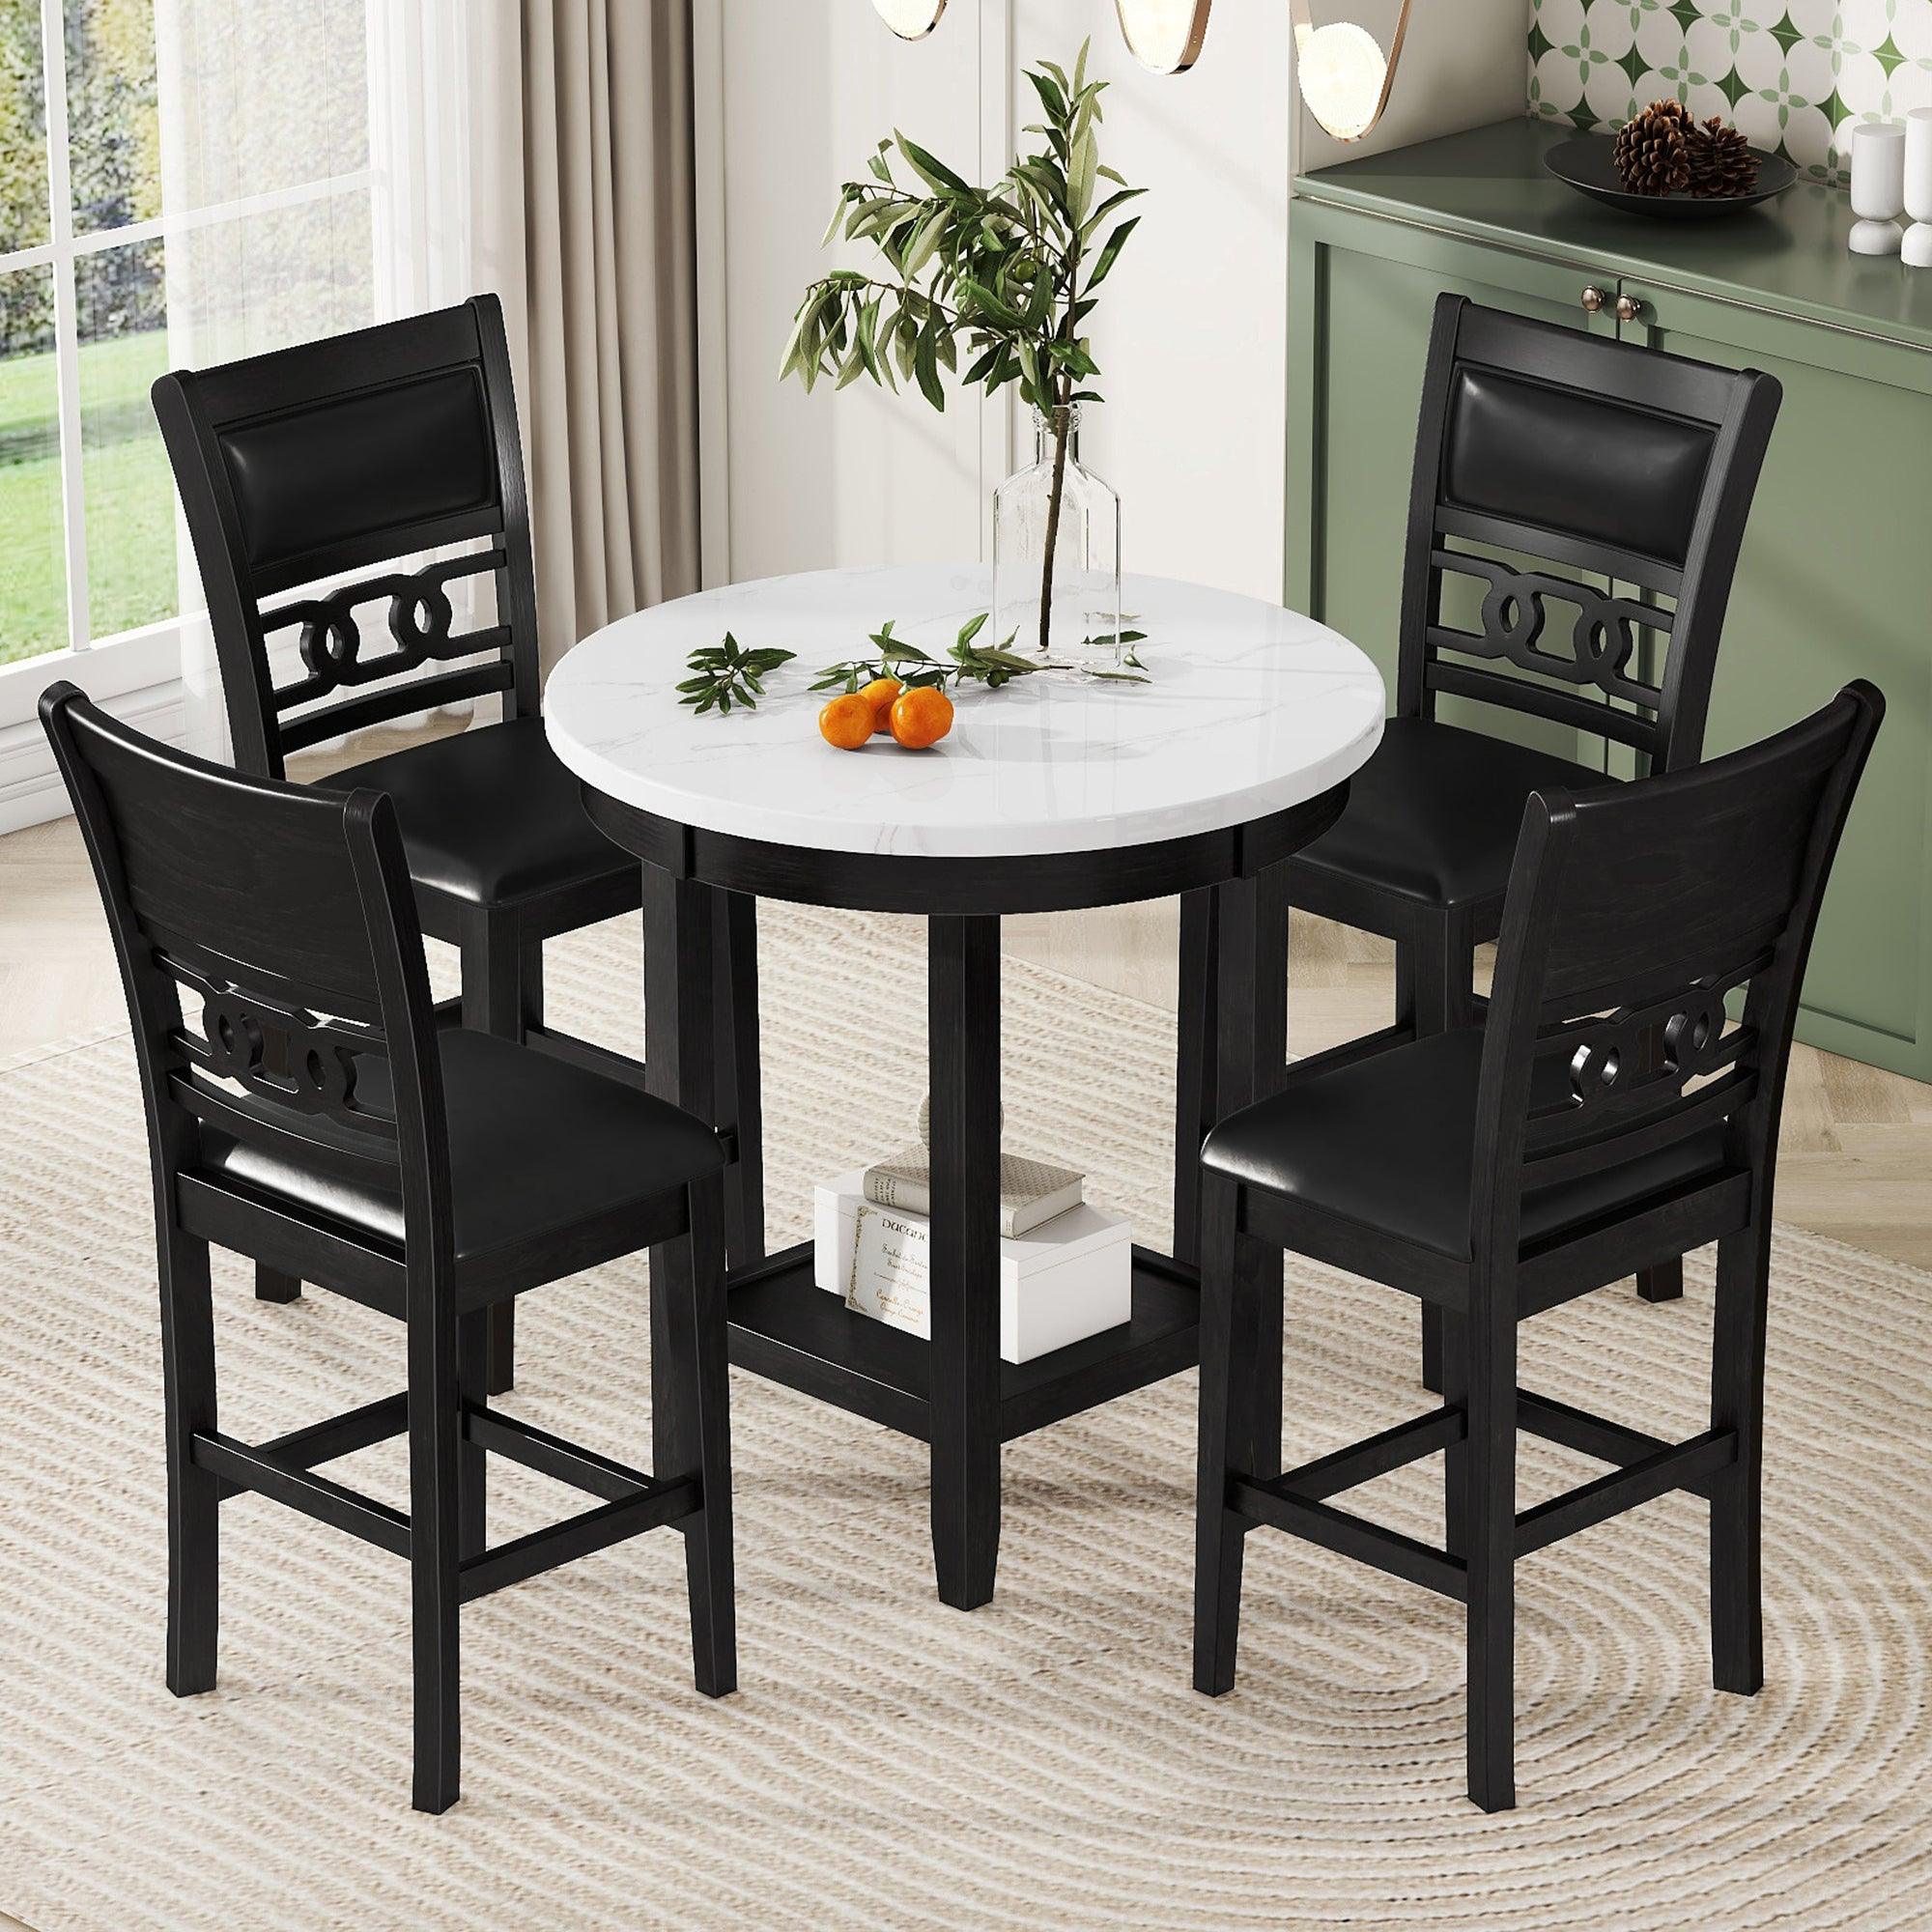 🆓🚛 5-Piece Counter Height Dining Round Table Set, 1 Faux Marble Top Dining Table & 4 Pu-Leather Chairs, Dark Espresso